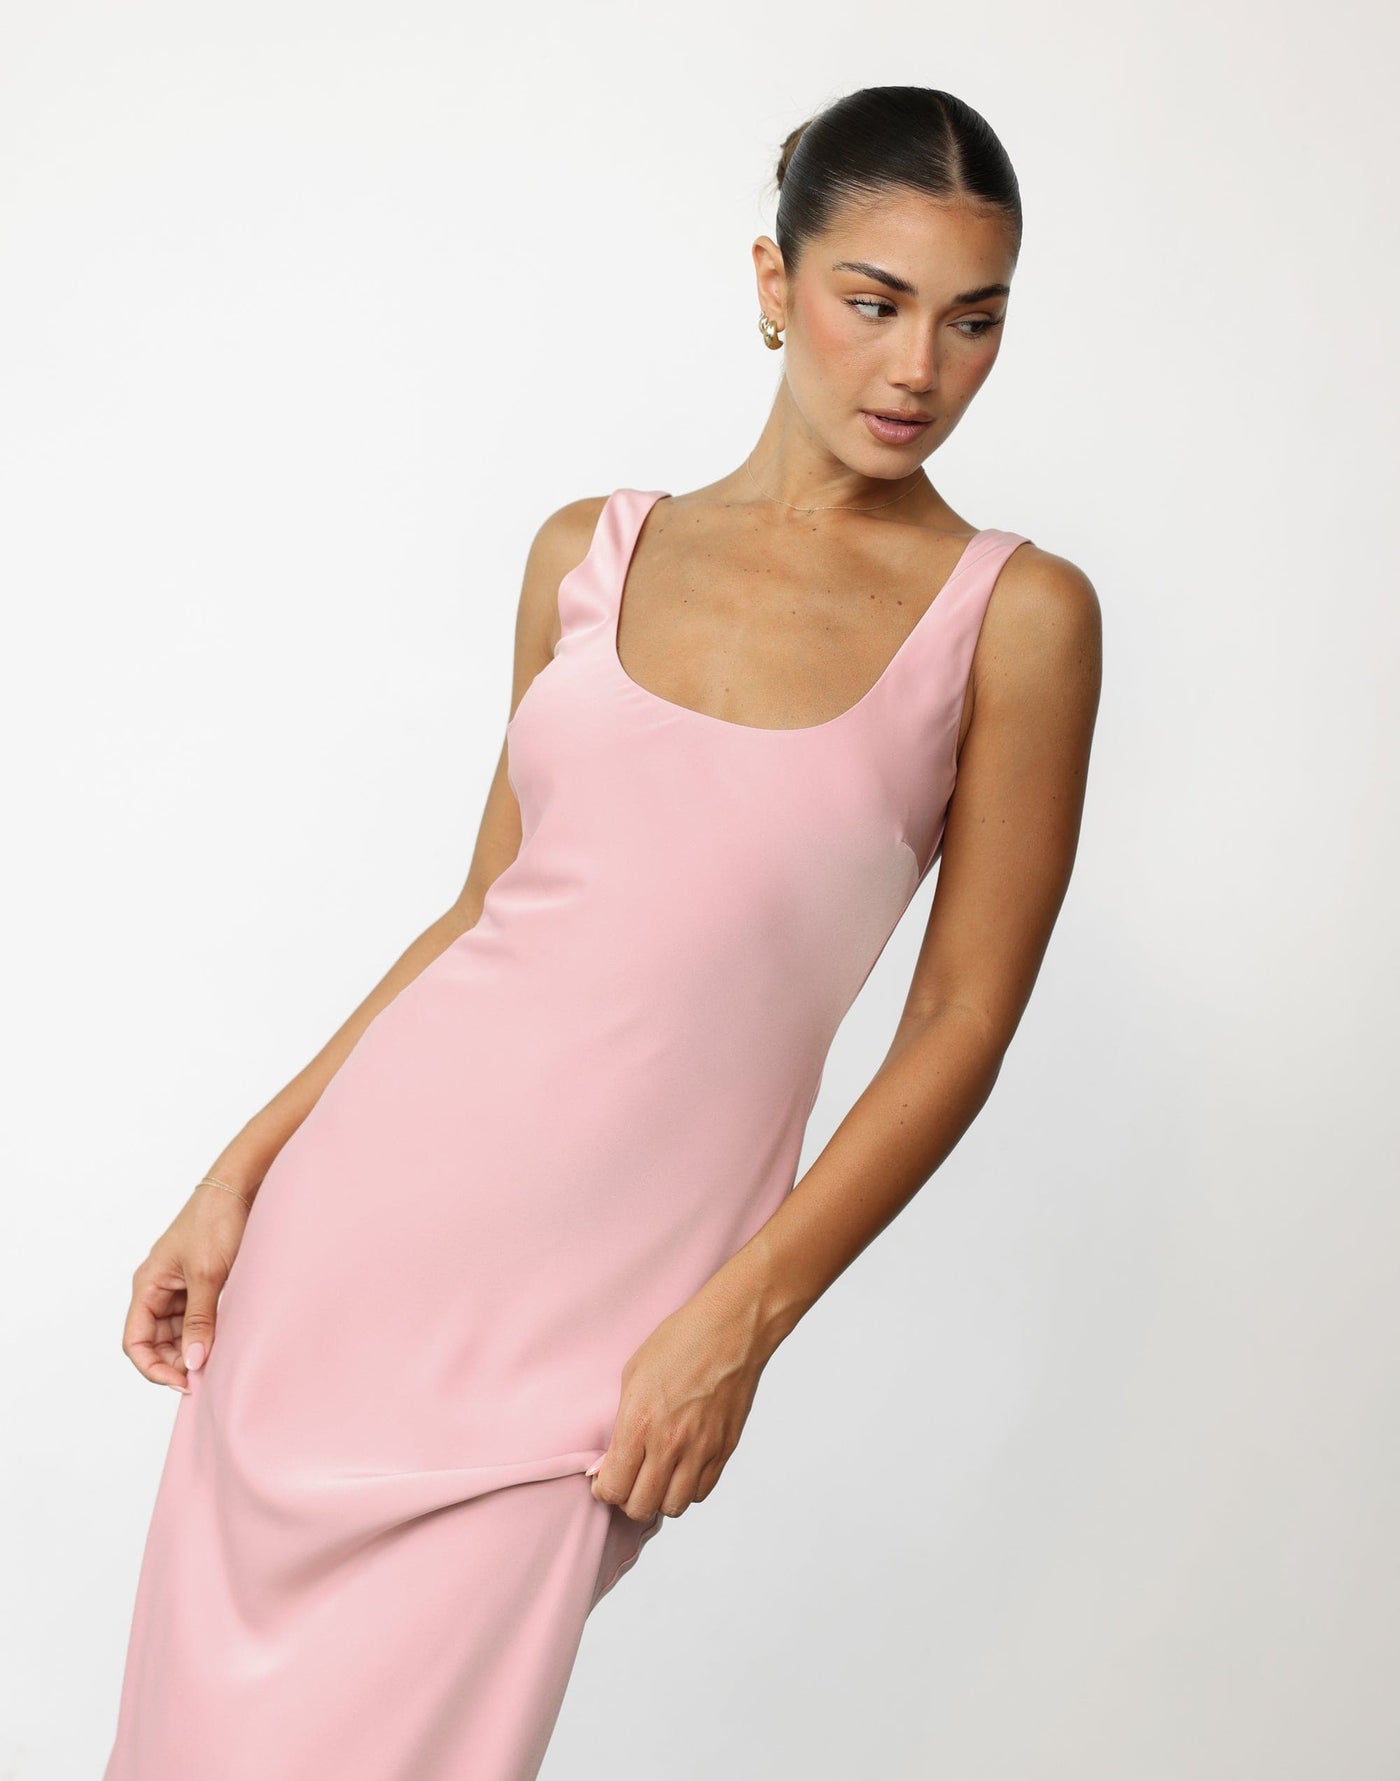 Camillio Maxi Dress (Blush) | CHARCOAL Exclusive - High Round Neckline and Scoop Back Satin Maxi - Women's Dress - Charcoal Clothing